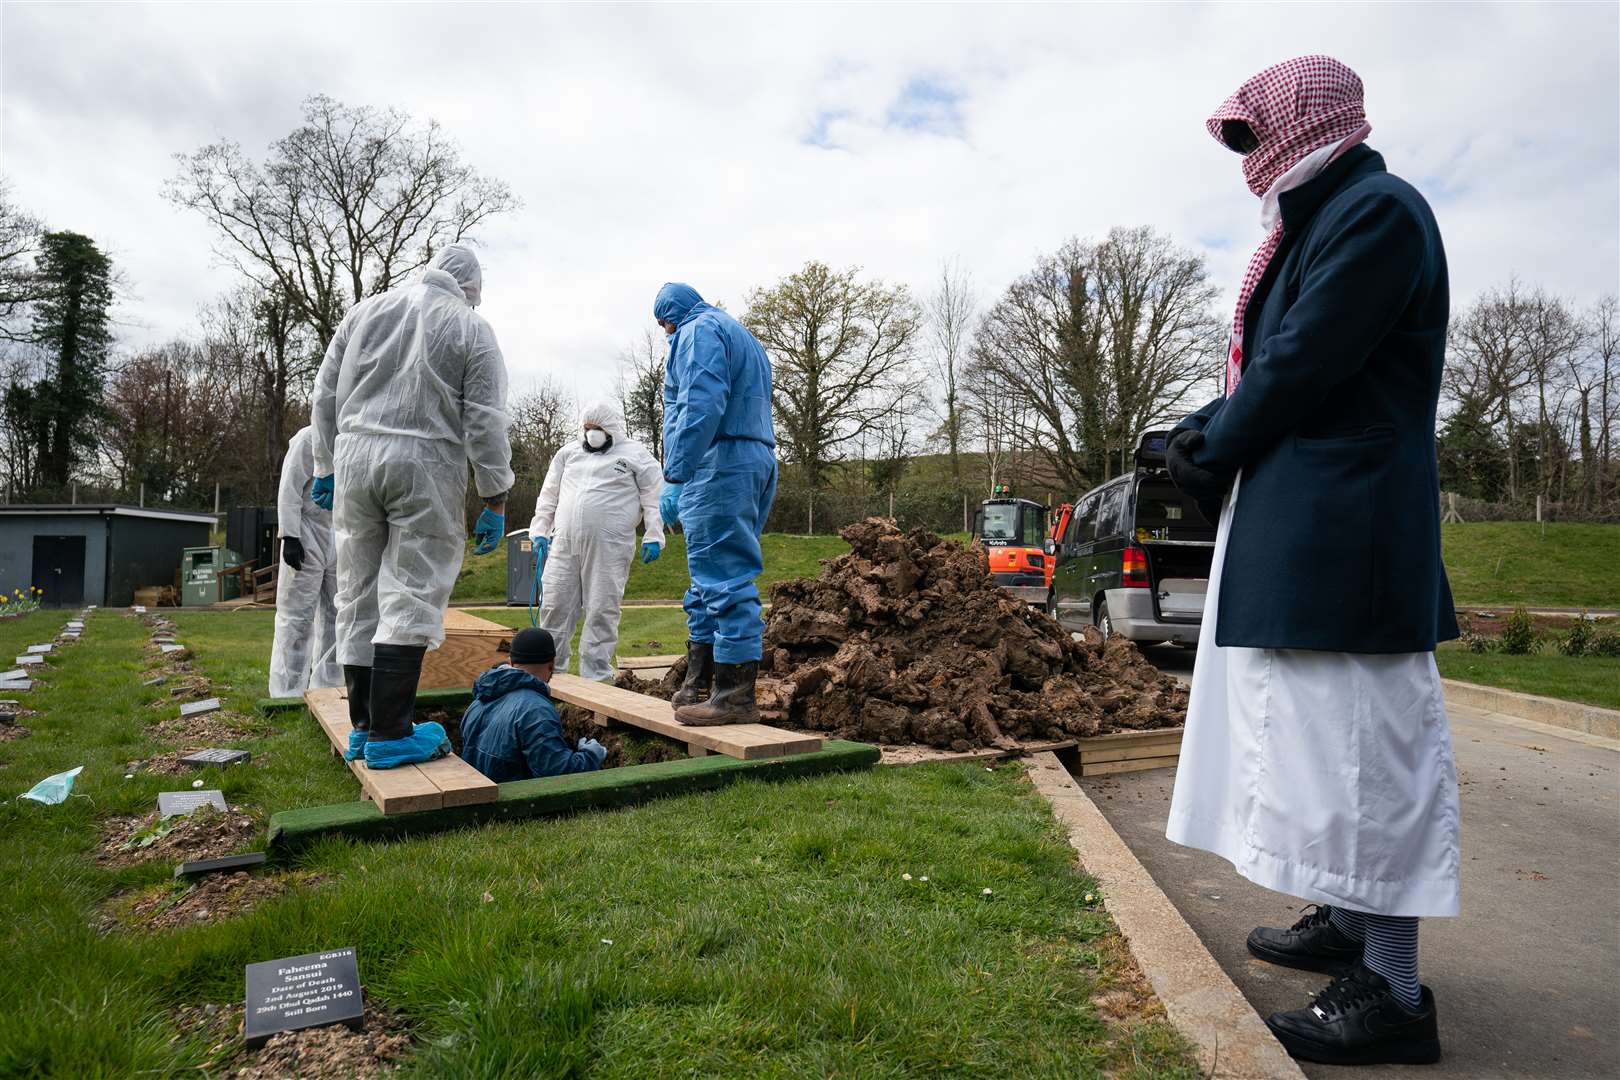 The coffin of 13-year-old of Ismail Mohamed Abdulwahab is lowered into the ground at the Eternal Gardens Muslim Burial Ground at Chislehurst (Aaron Chown/PA)